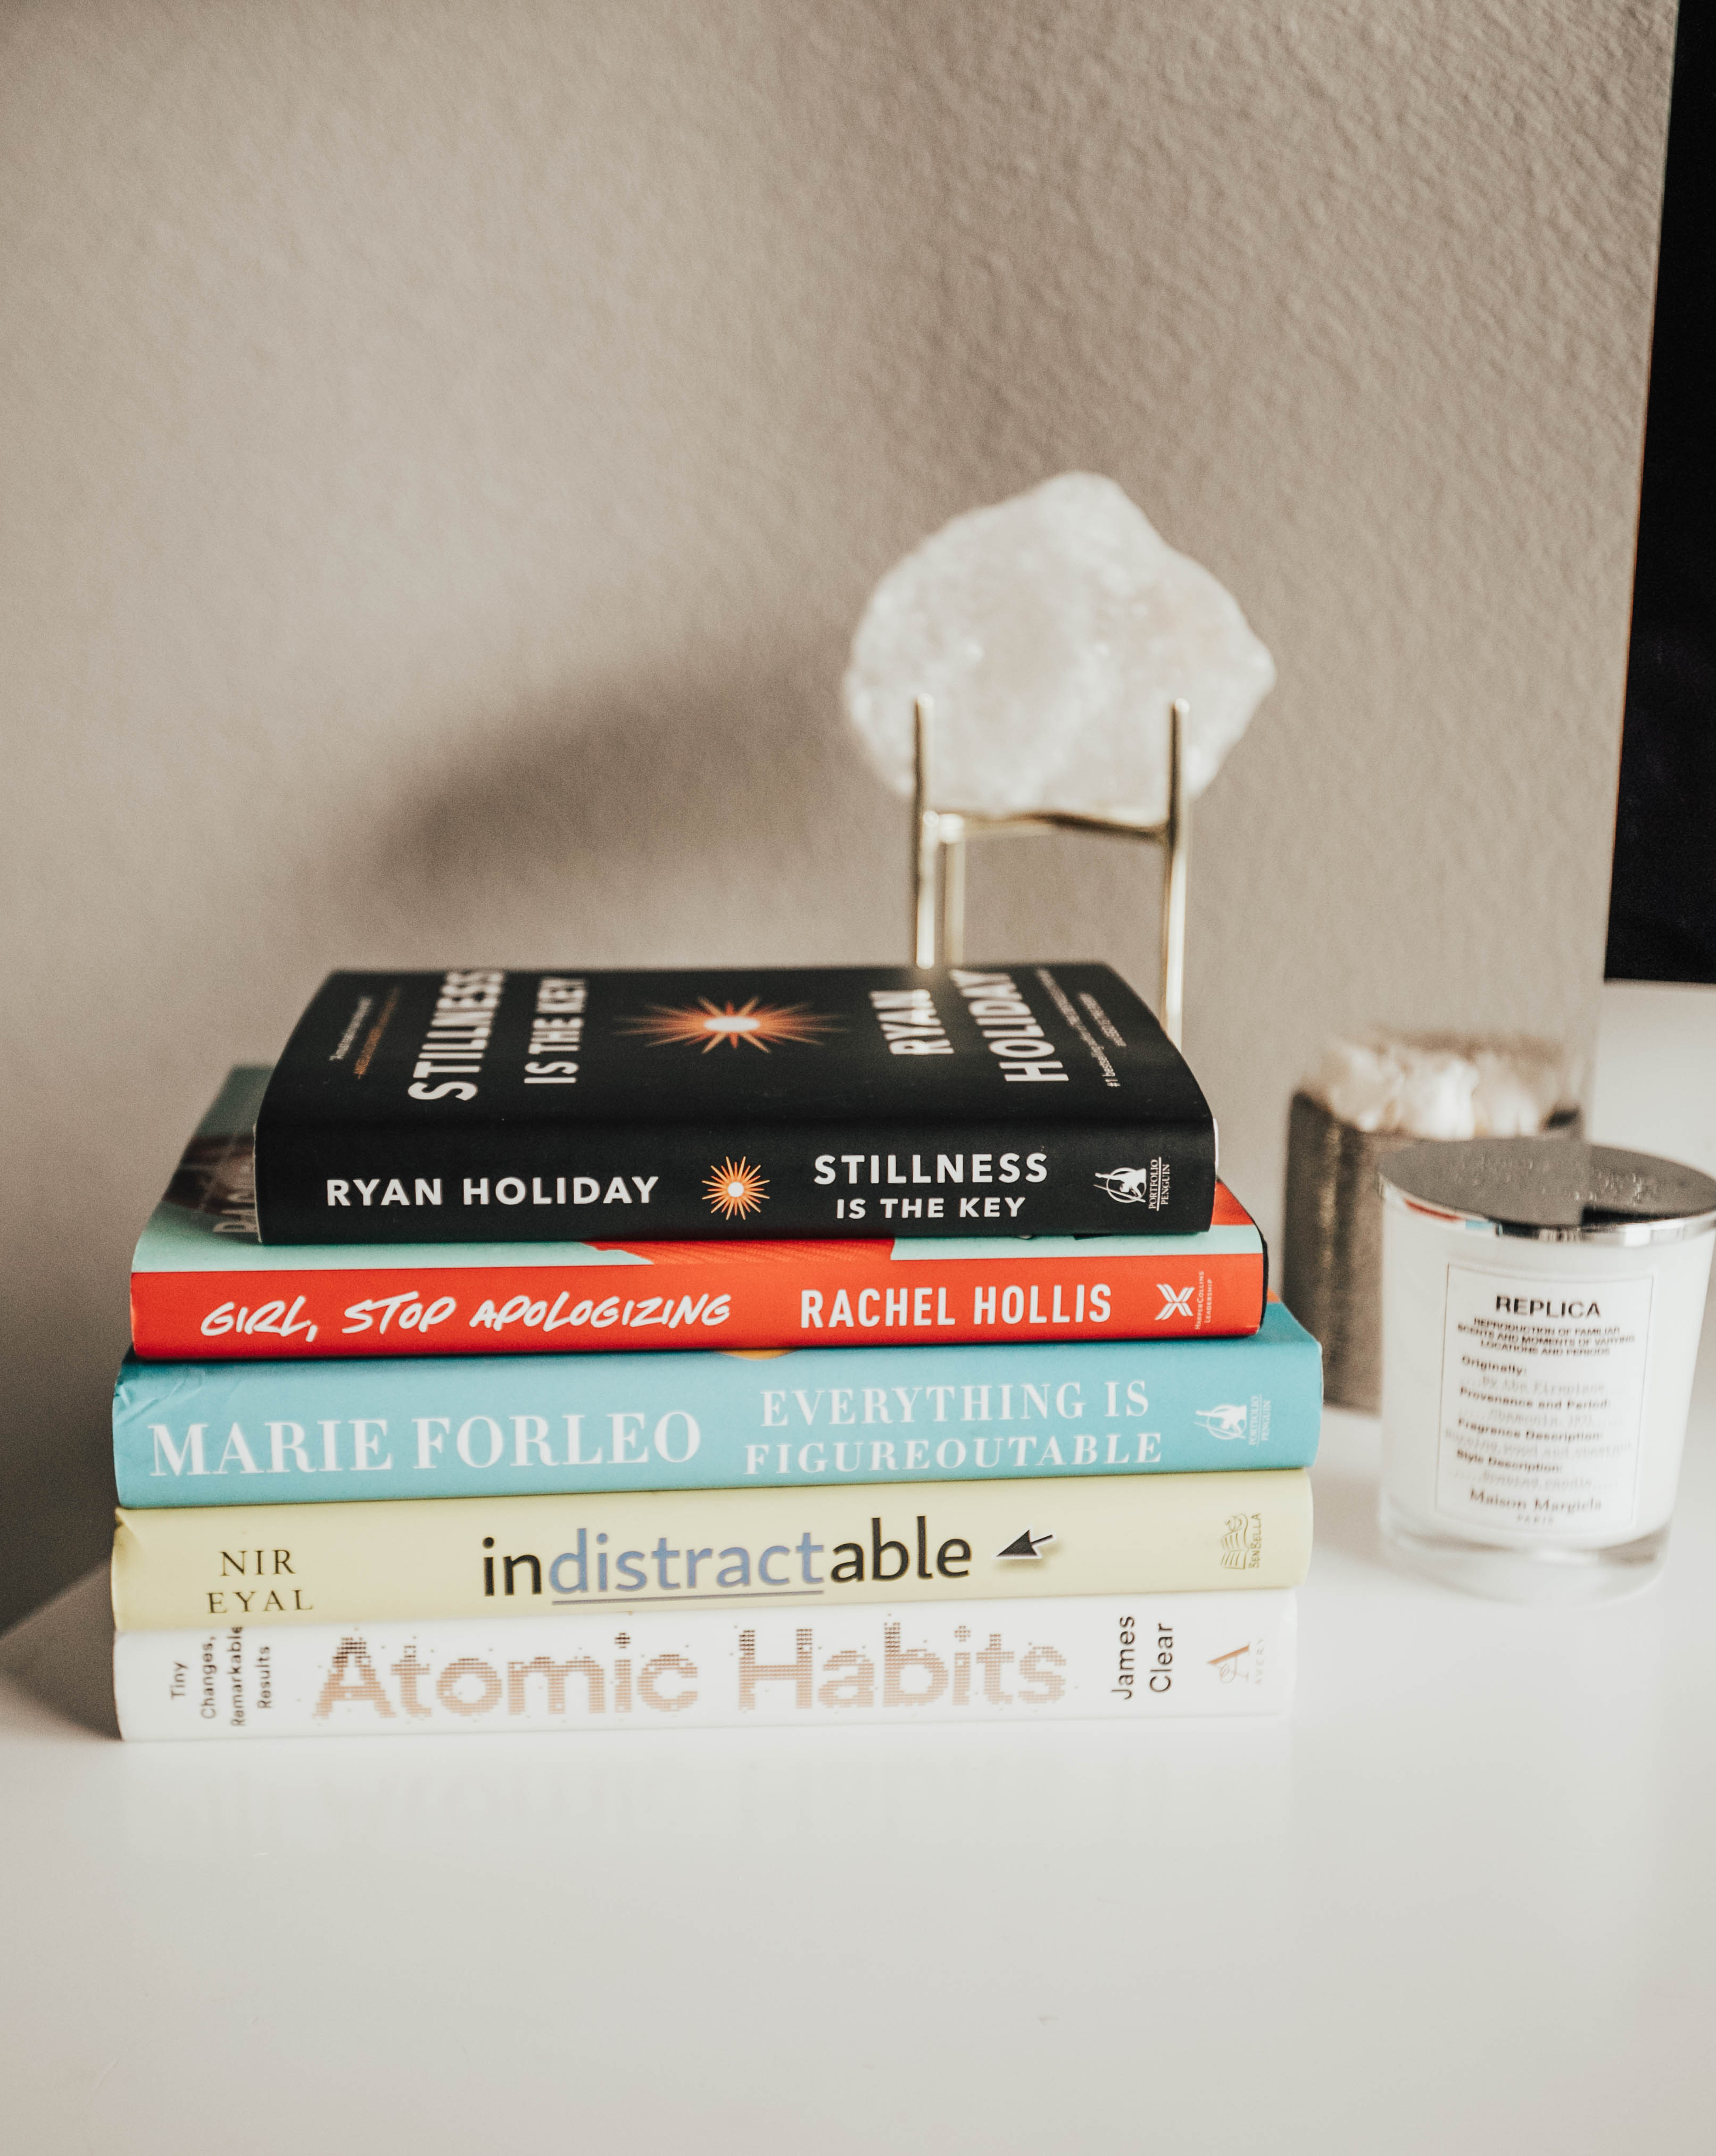 Reno blogger, Ashley Zeal, from Two Peas in a Prada shares her list of Best Books for a New You This Year. Find out all the best titles to start your year and your business off on the right foot.